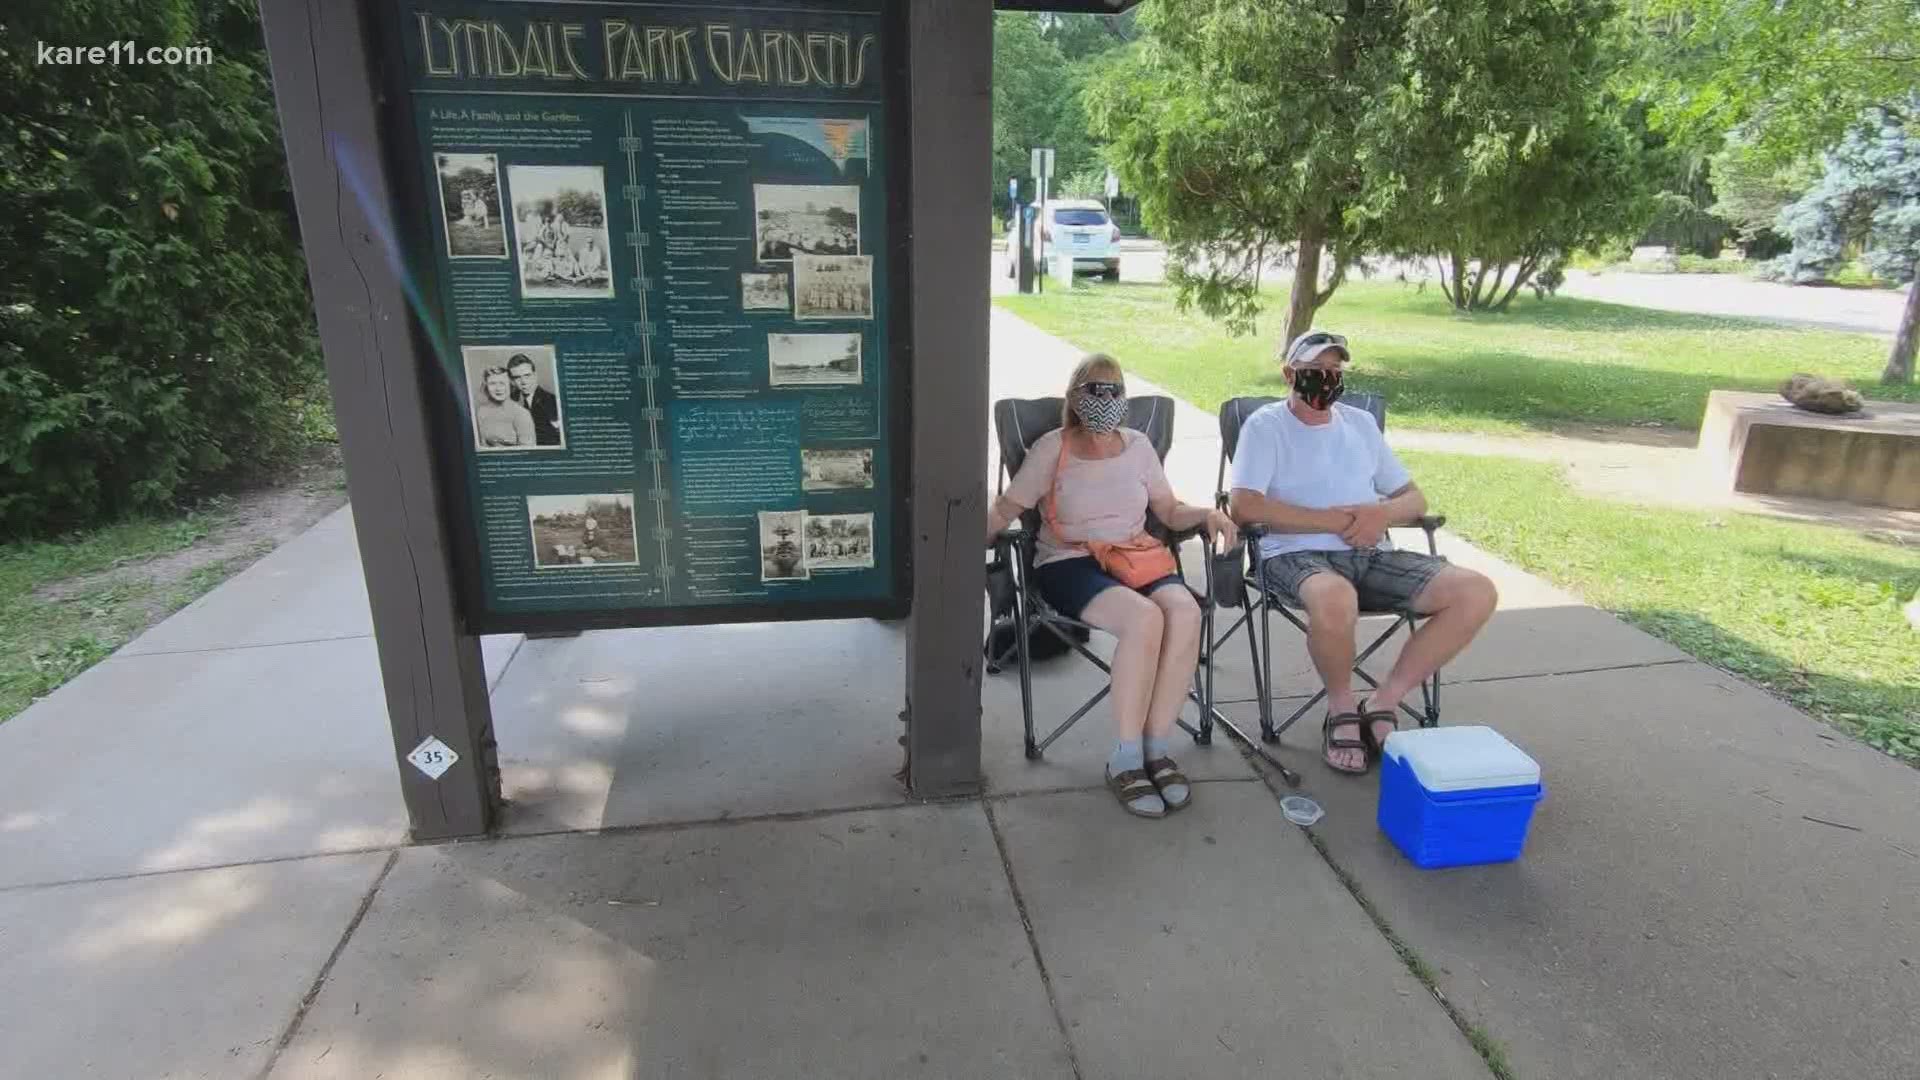 It won't be a typical holiday weekend but there are still some activities in the Twin Cities